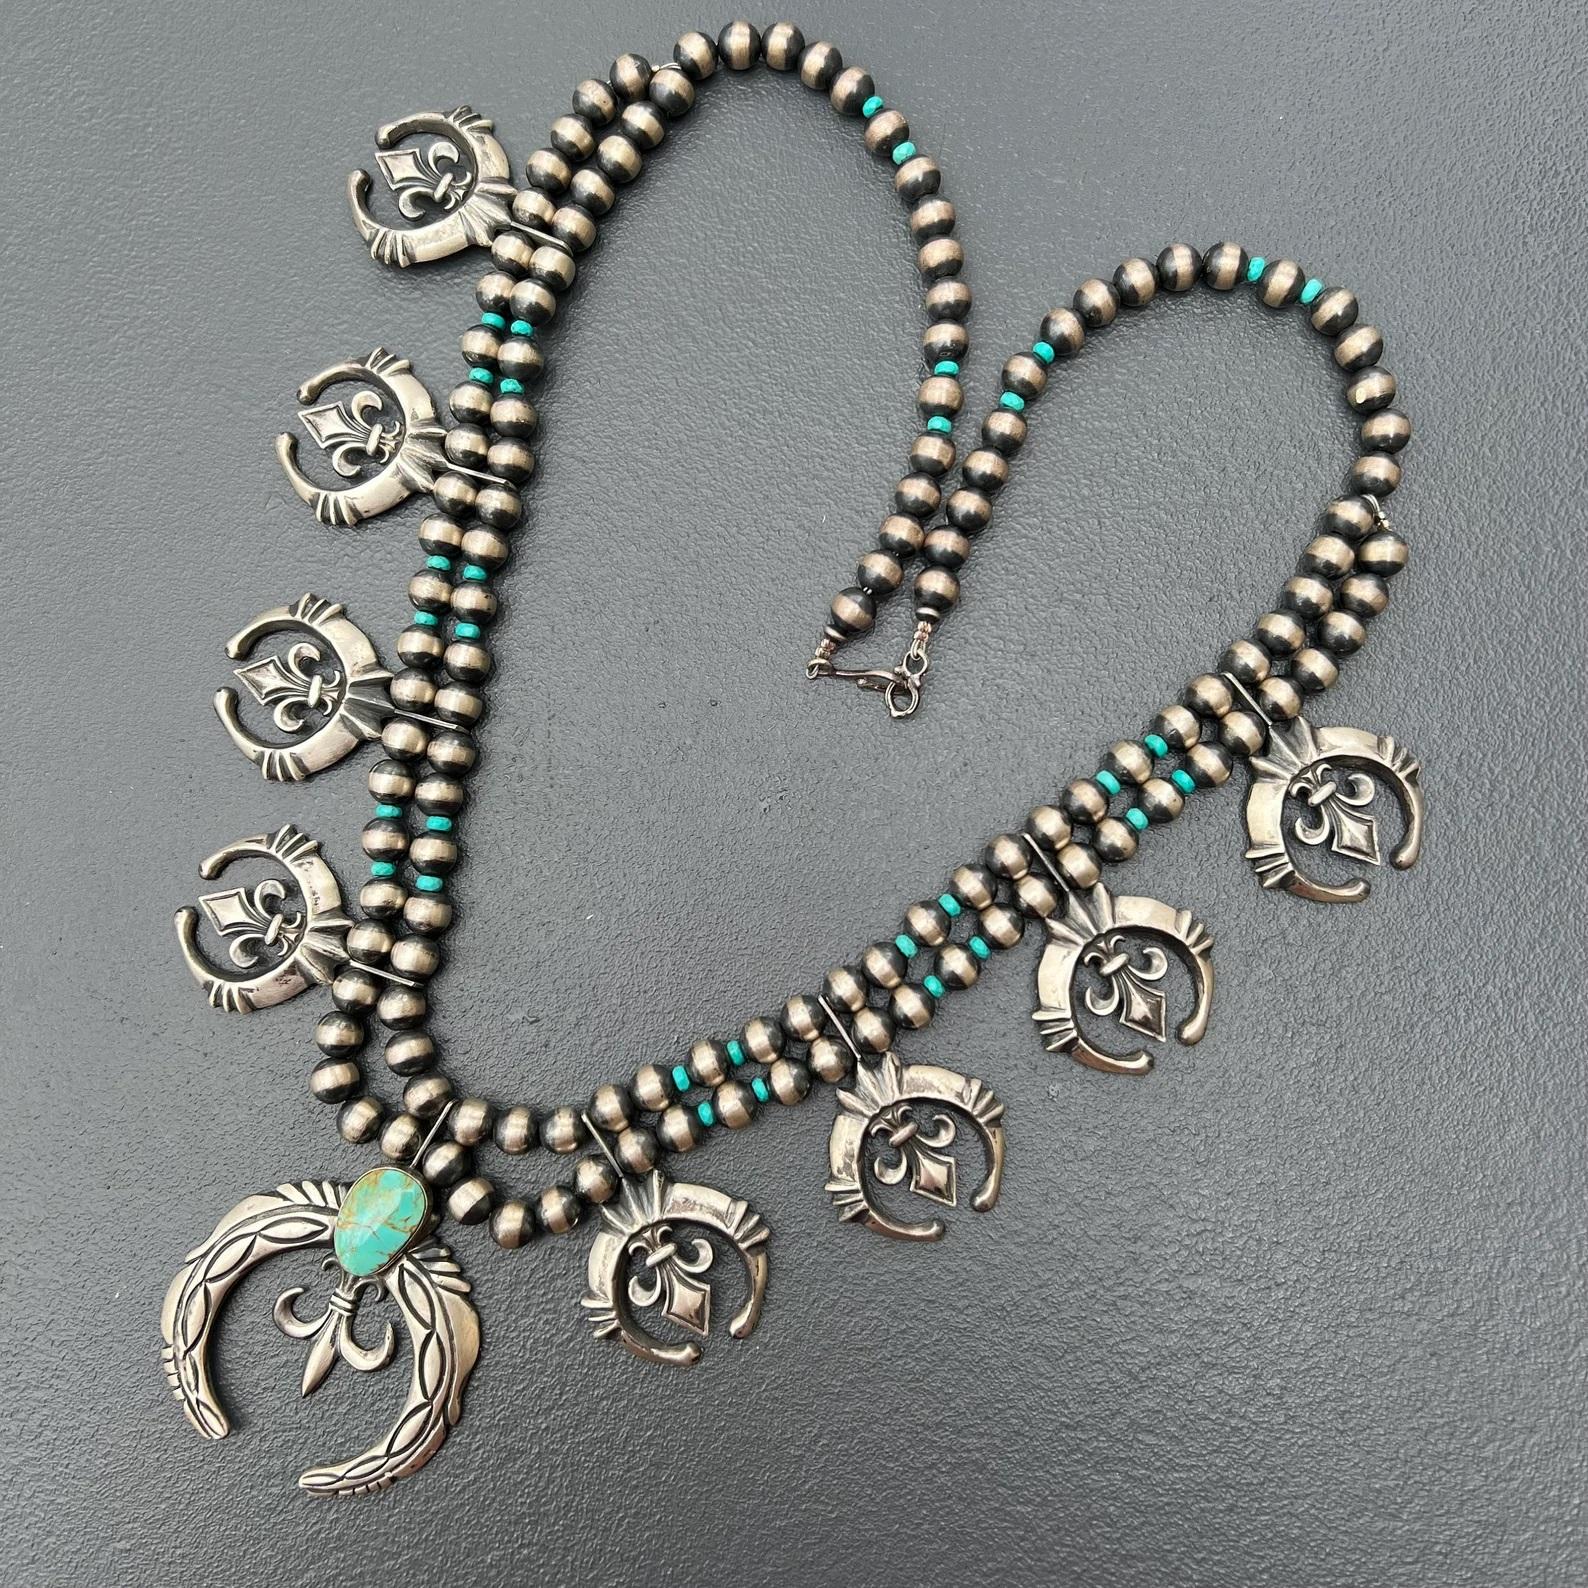 MASSIVE / Heavy Vintage  Handcrafted by Navajo silversmith, Charles Johnson  oxidized sterling silver necklace with a strand of Navajo pearls, featuring a large naja in center and smaller 4 naja on each side . All najas made of solid silver and are